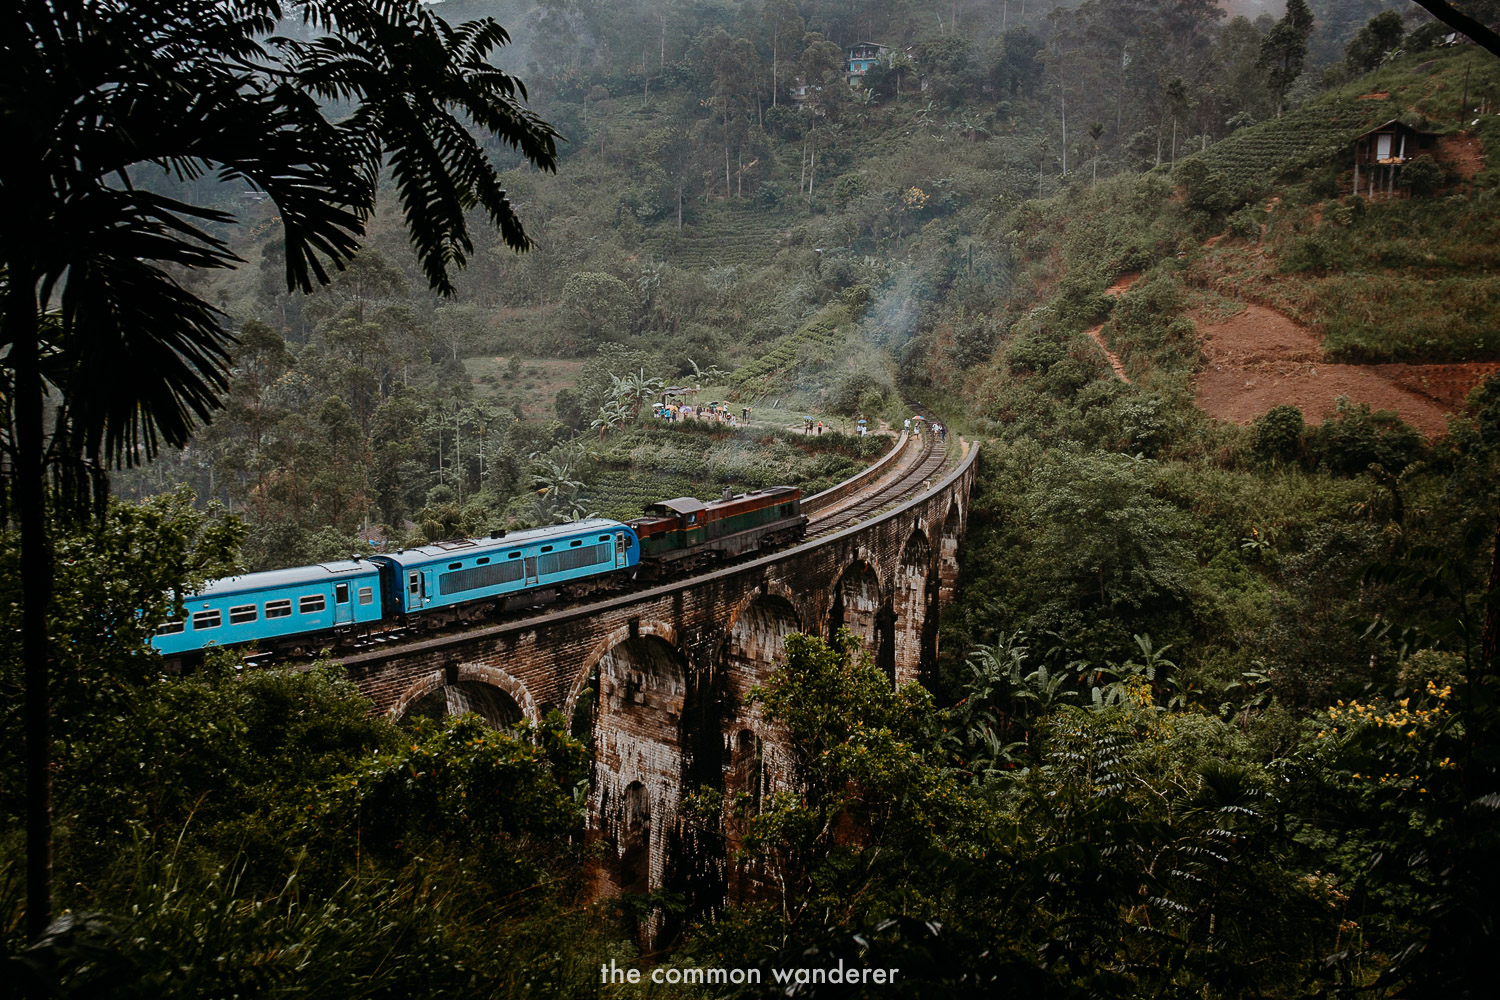 The Kandy to Ella train ride is one of the best in Sri Lanka | Sri Lanka travel guide